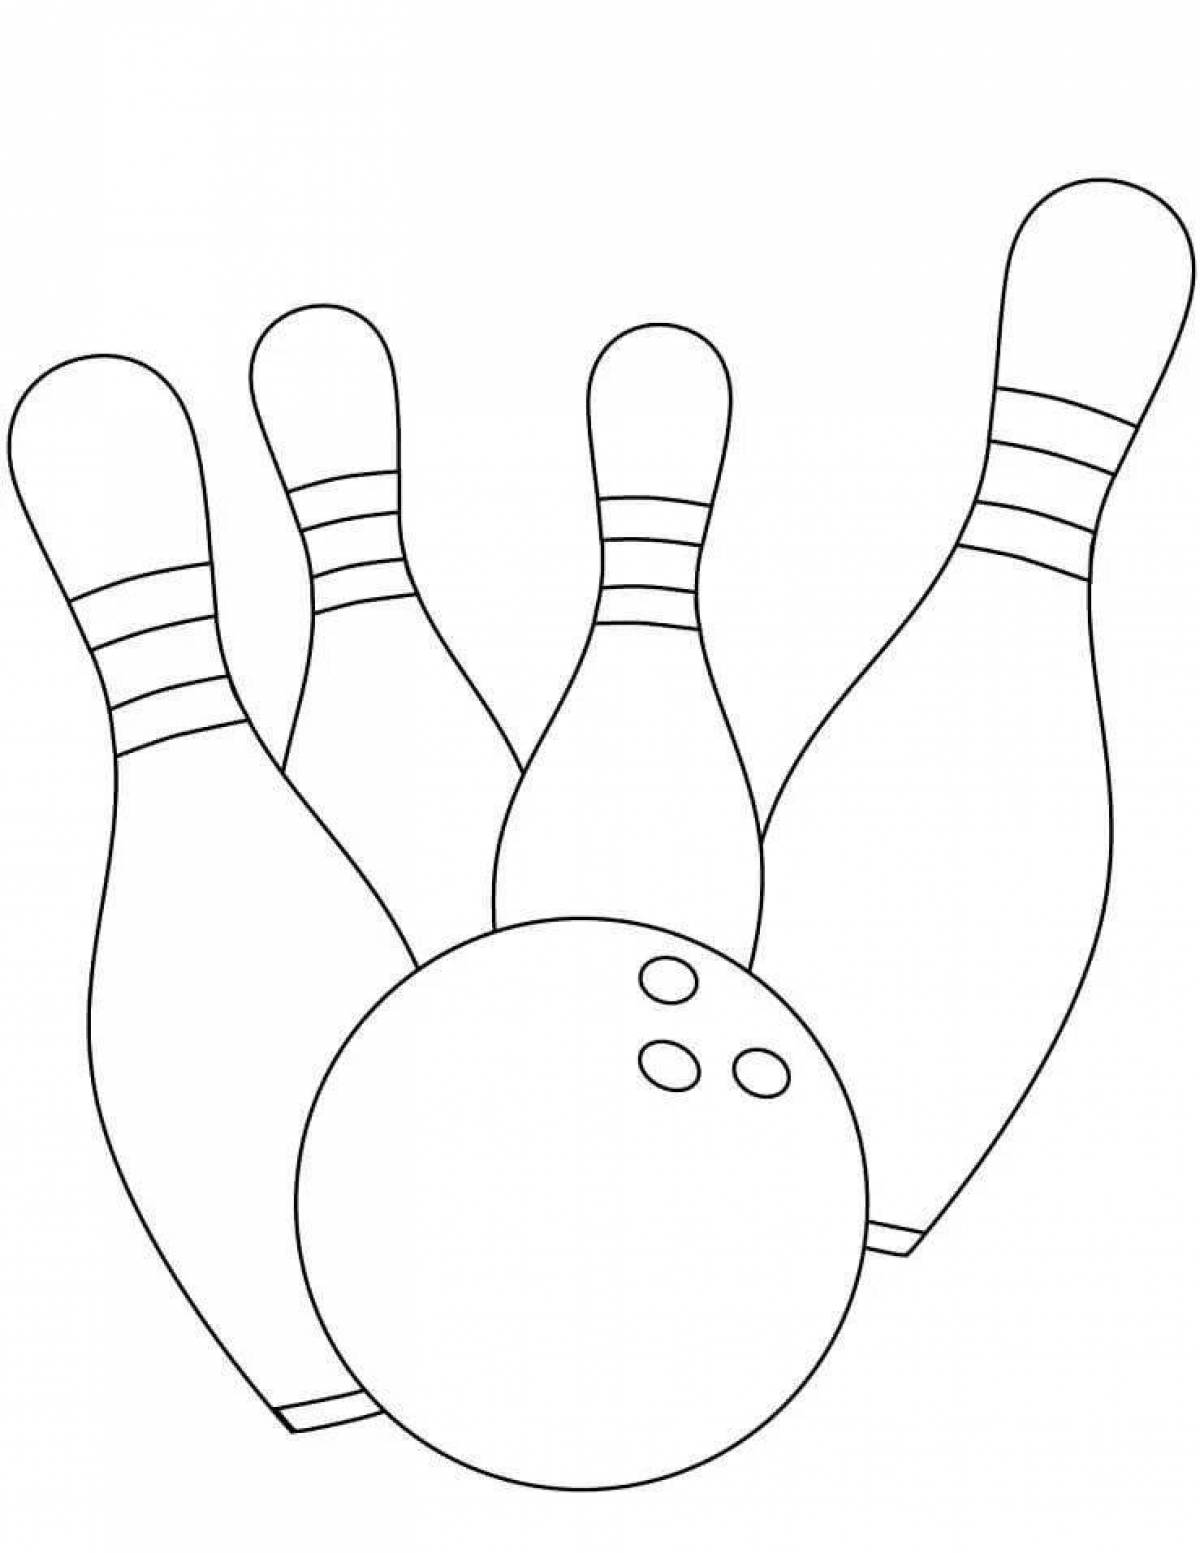 Colorful skittles coloring pages